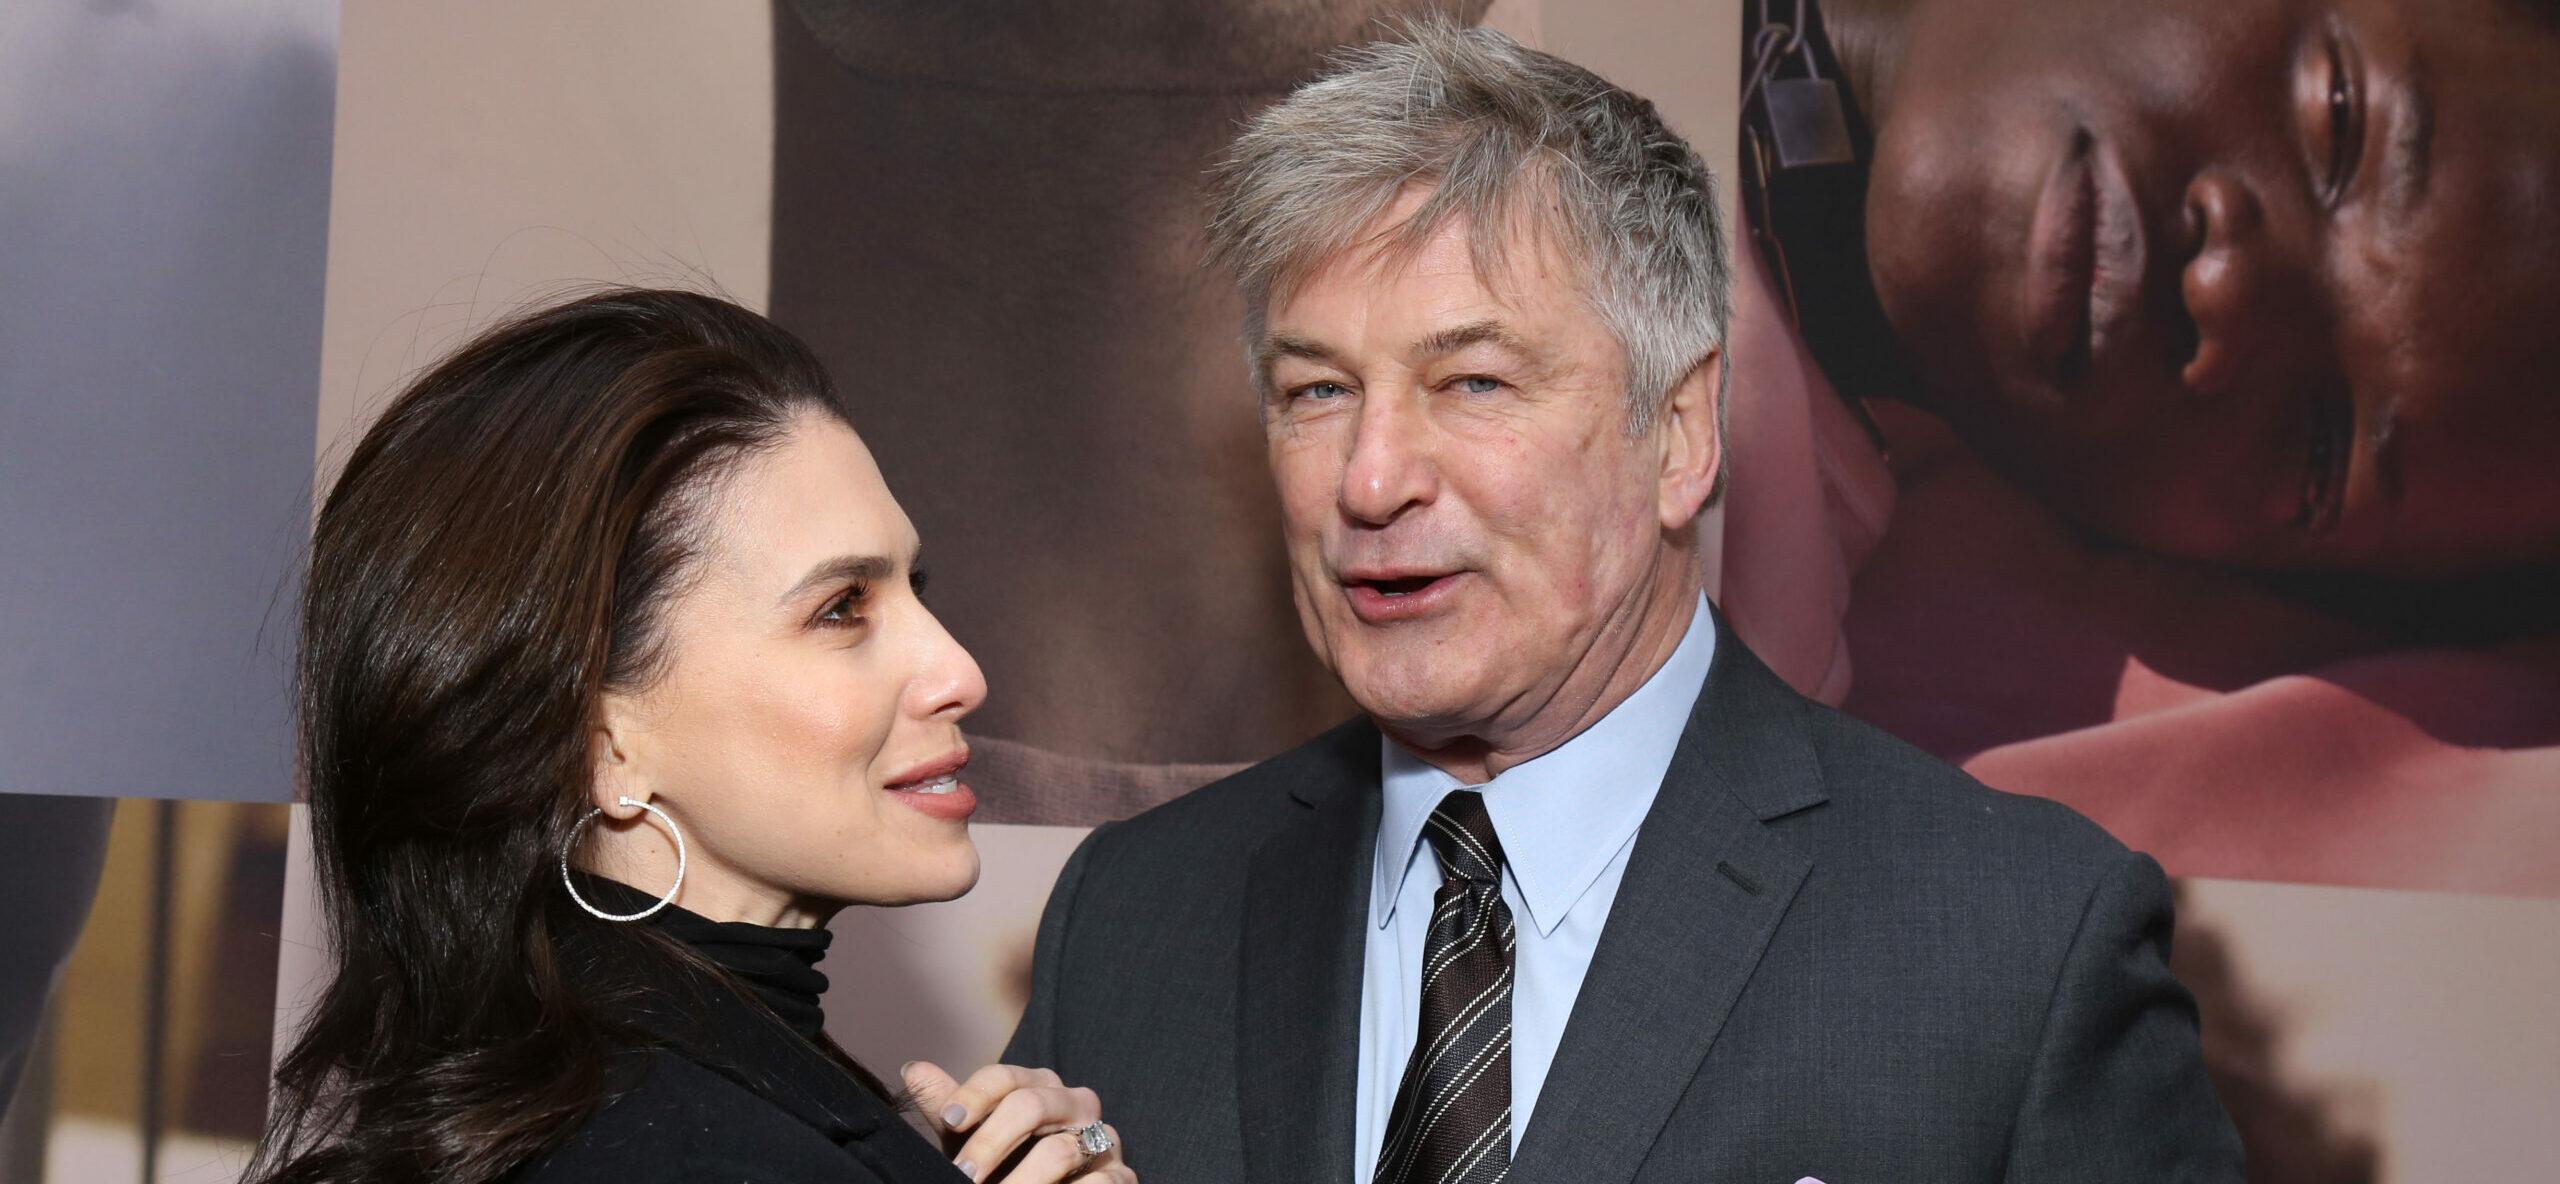 Alec Baldwin Is ‘Annoyed’ By Wife Hilaria Baldwin’s Request For A Selfie